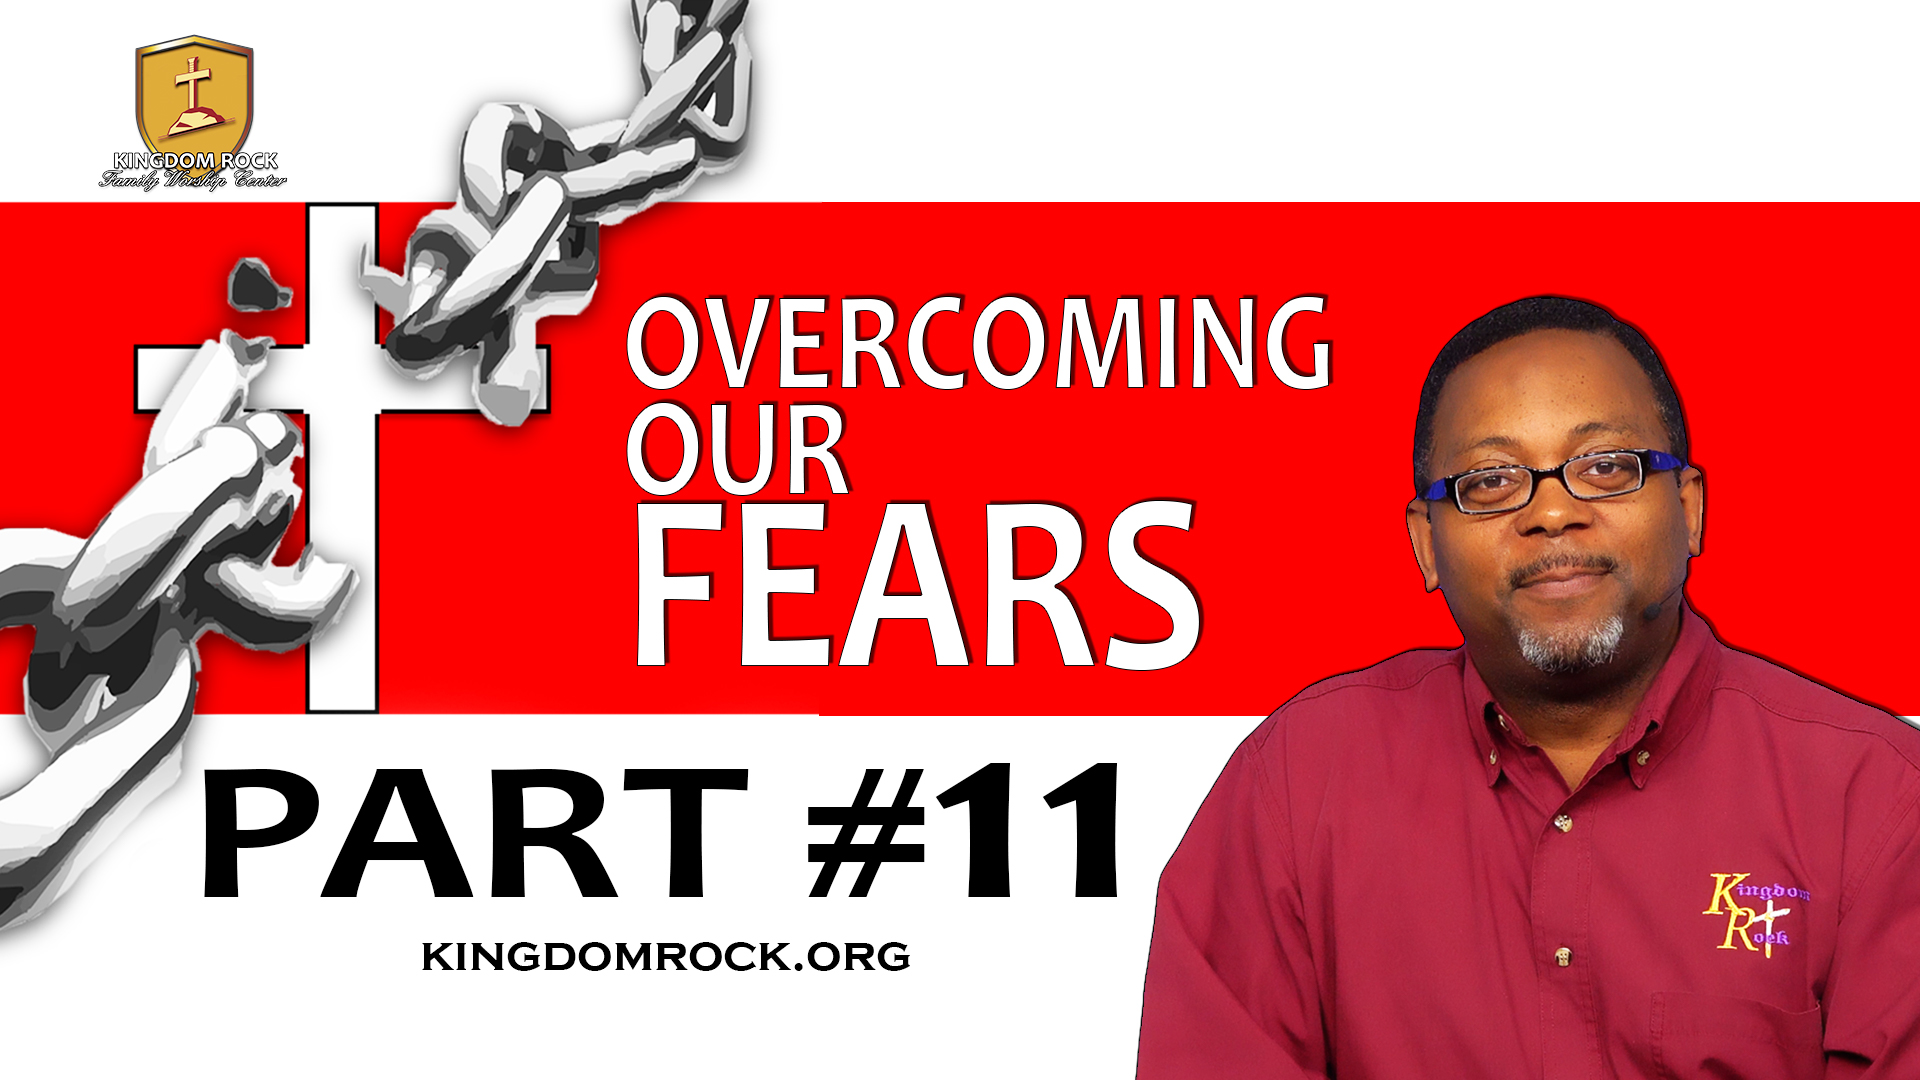 Art for Overcoming Our Fears Part 11 Full by Mark A. Stroud